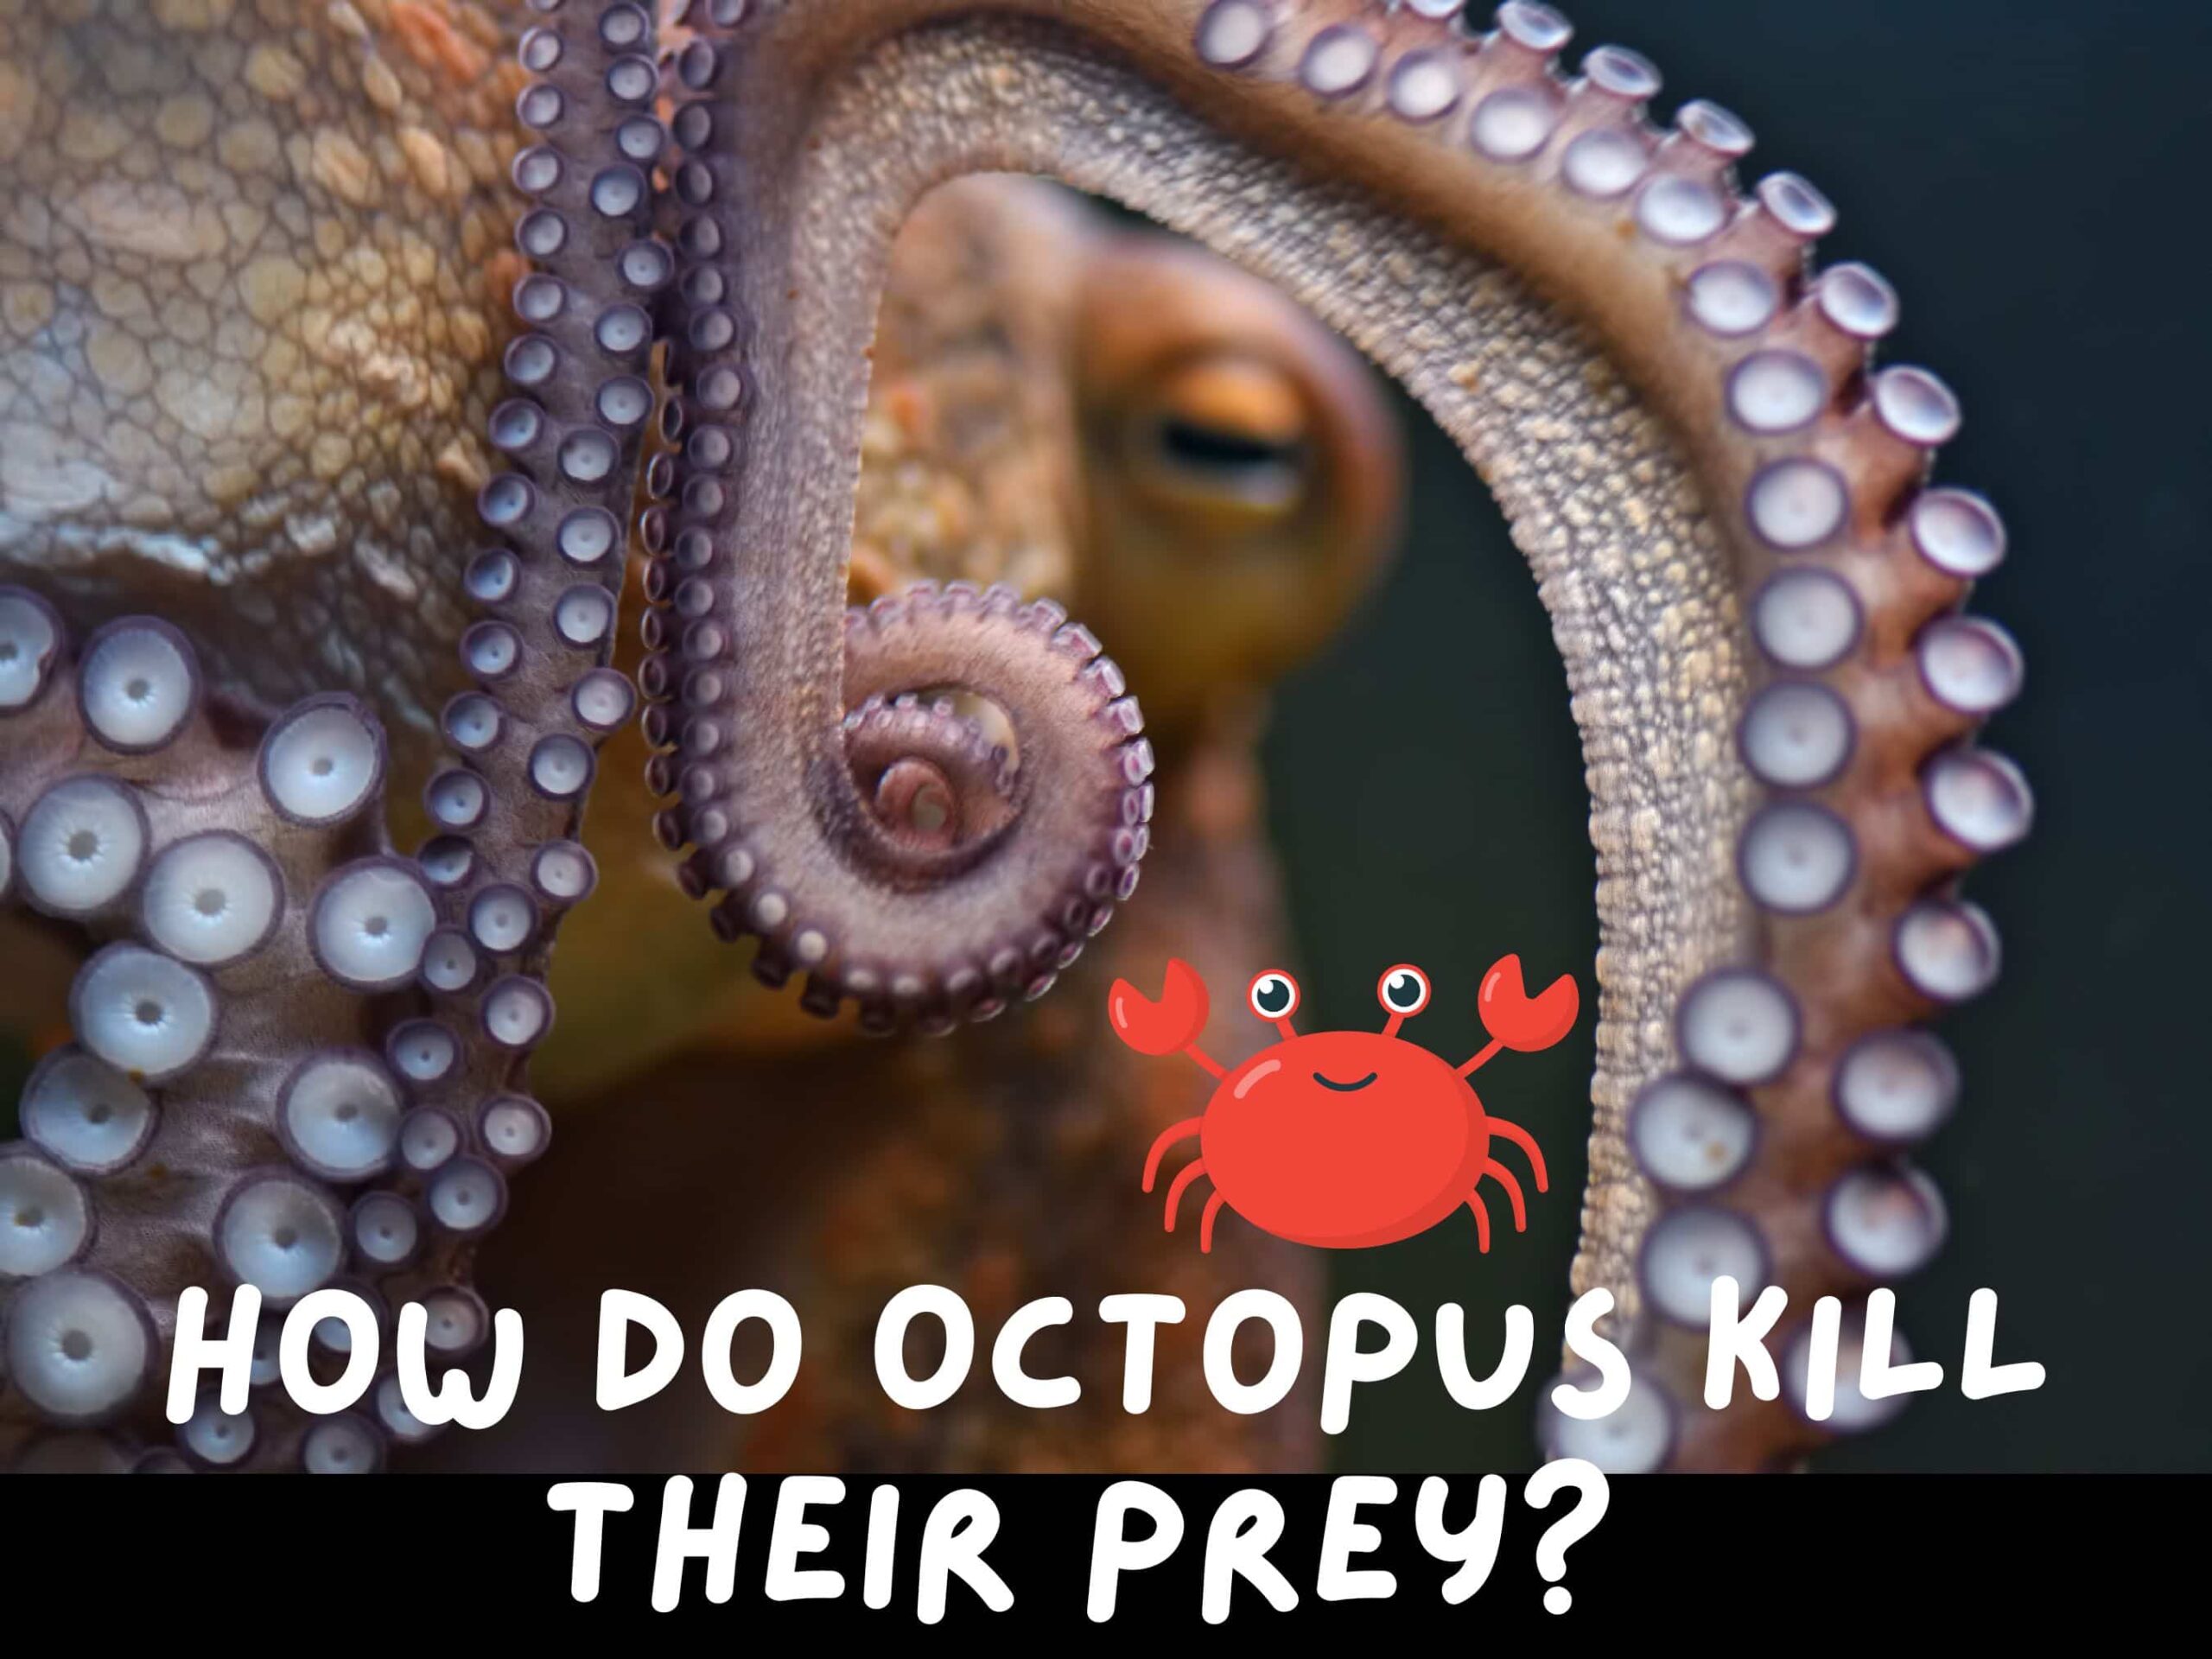 Picture of octopus and cartoon crab with title, "how do octopus kill their prey?"